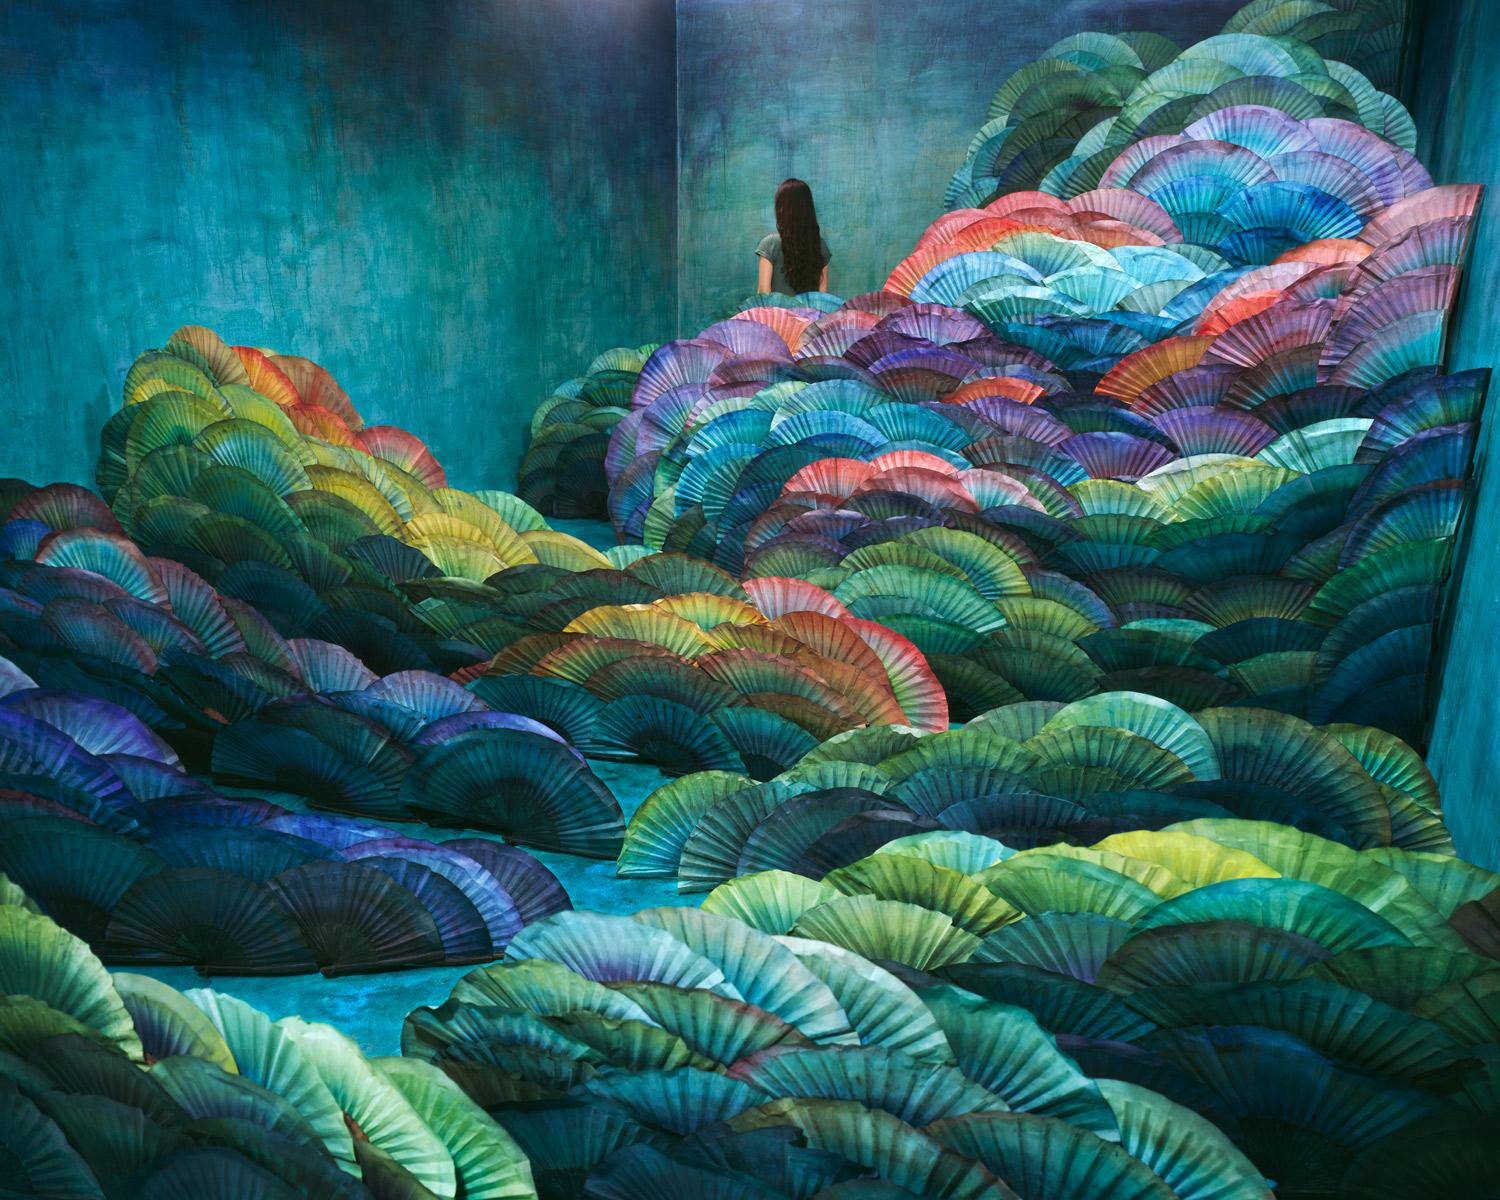 JeeYoung Lee Figurative Photograph - Nightscape